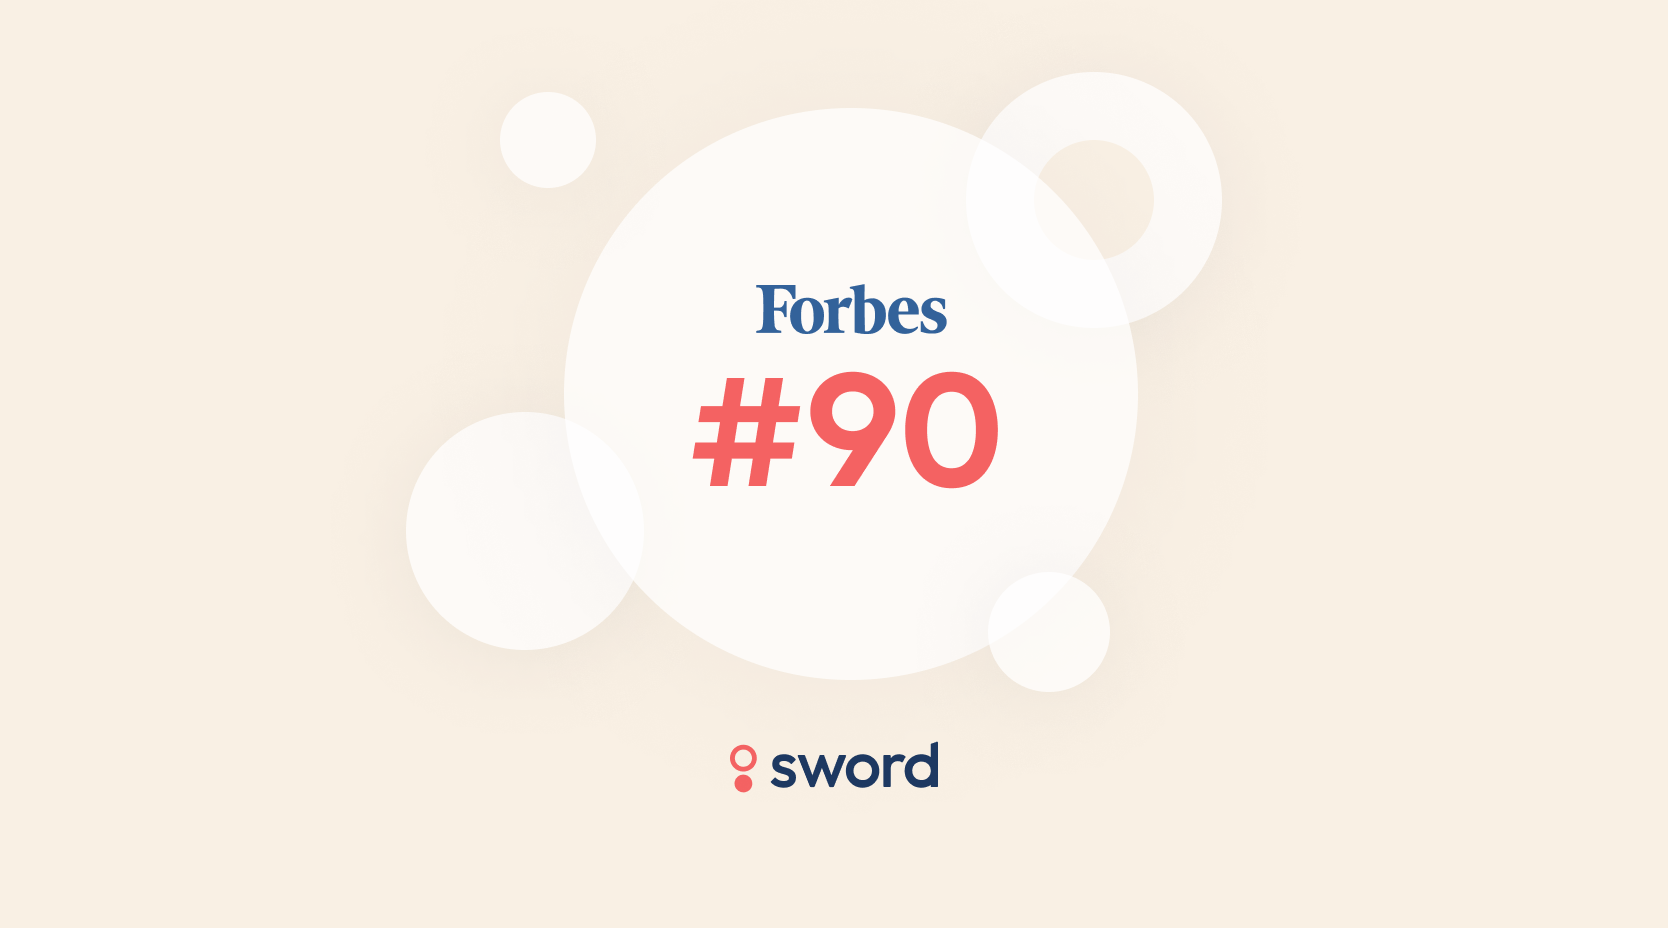 Sword is included in 2023 Forbes’ Best Startup Employers list